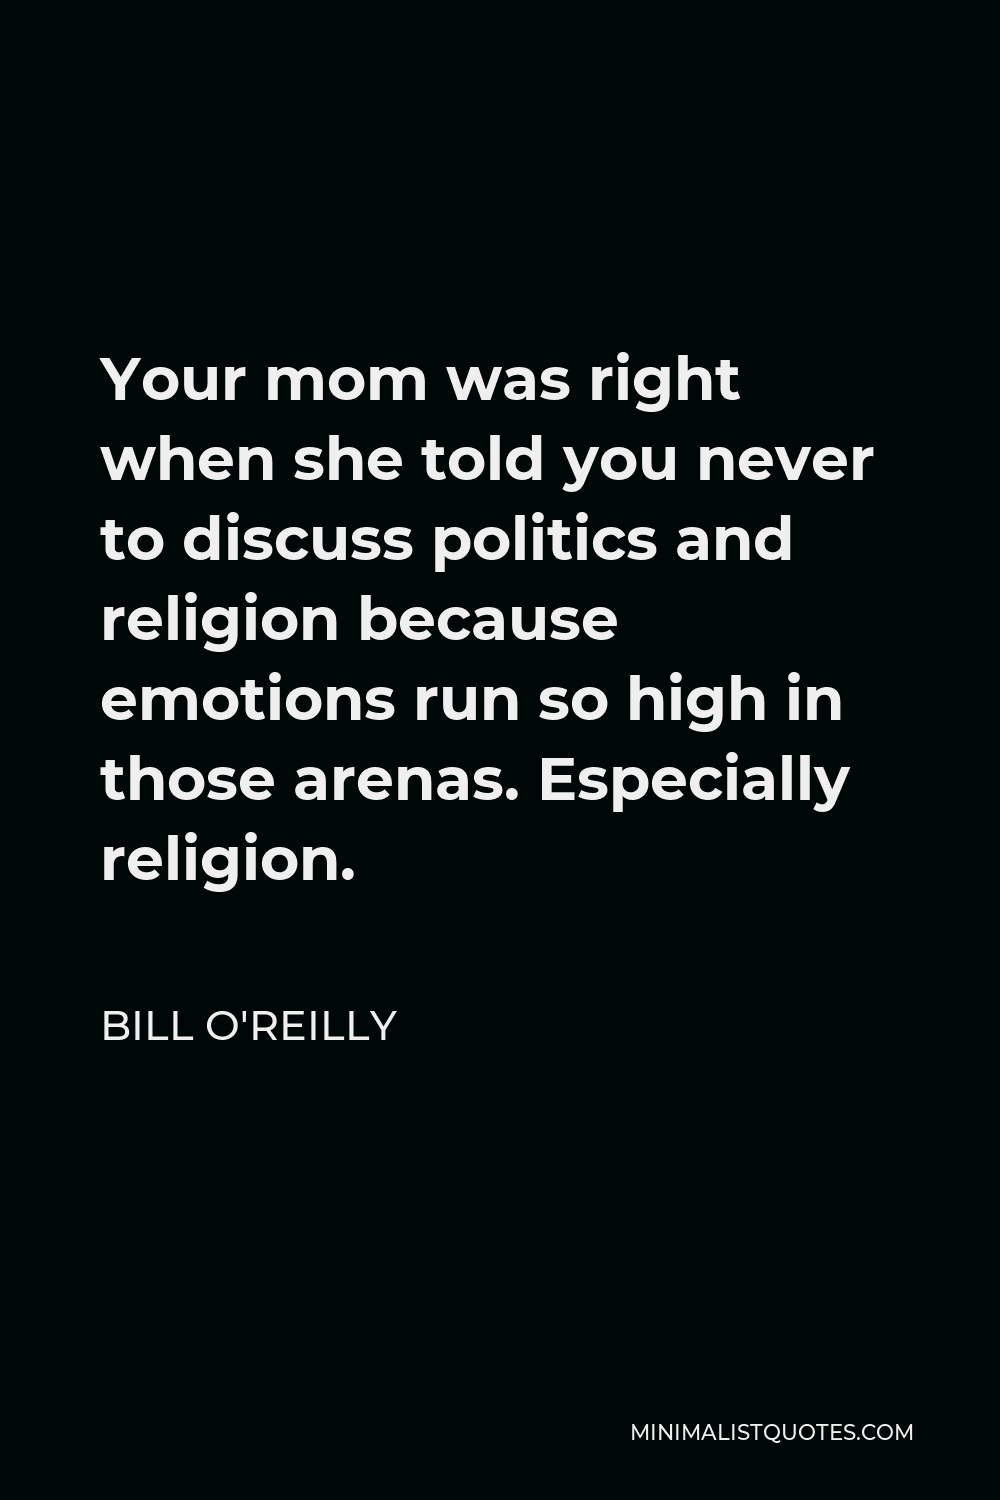 Bill O'Reilly Quote - Your mom was right when she told you never to discuss politics and religion because emotions run so high in those arenas. Especially religion.